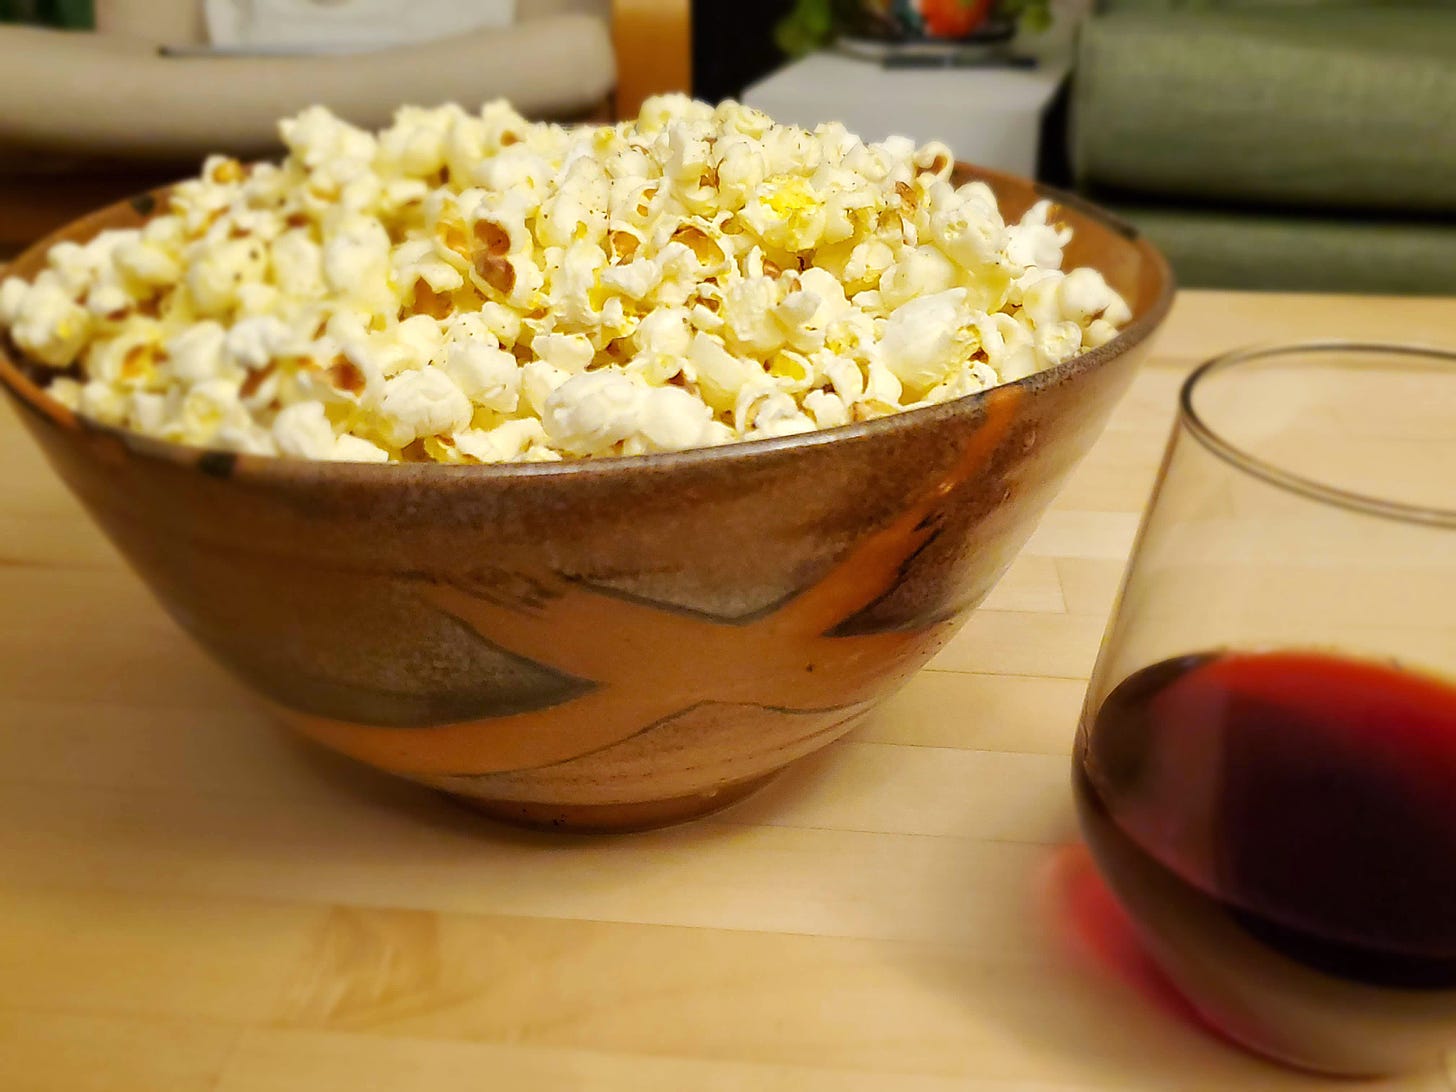 Popcorn piled high in a fancy bowl, with a glass of wine